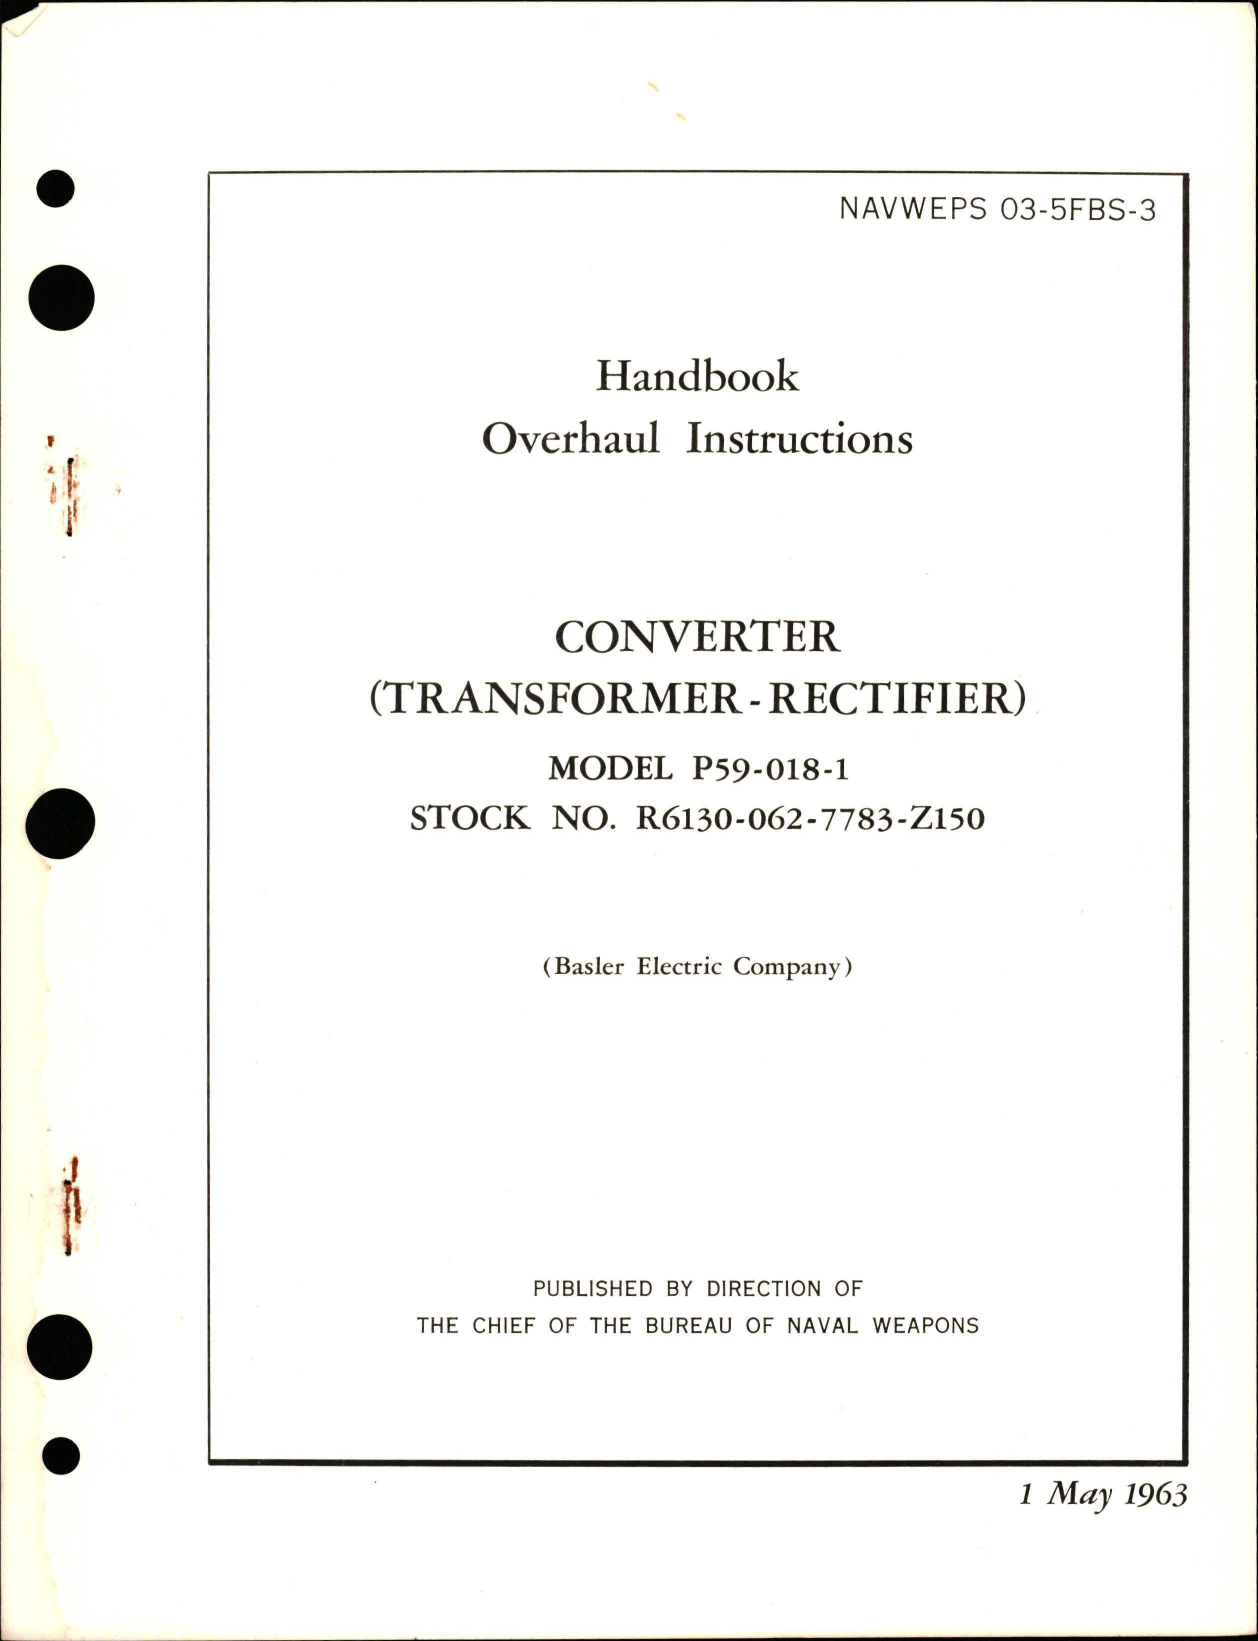 Sample page 1 from AirCorps Library document: Overhaul Instructions for Transformer Rectifier Converter - Model P59-018-1